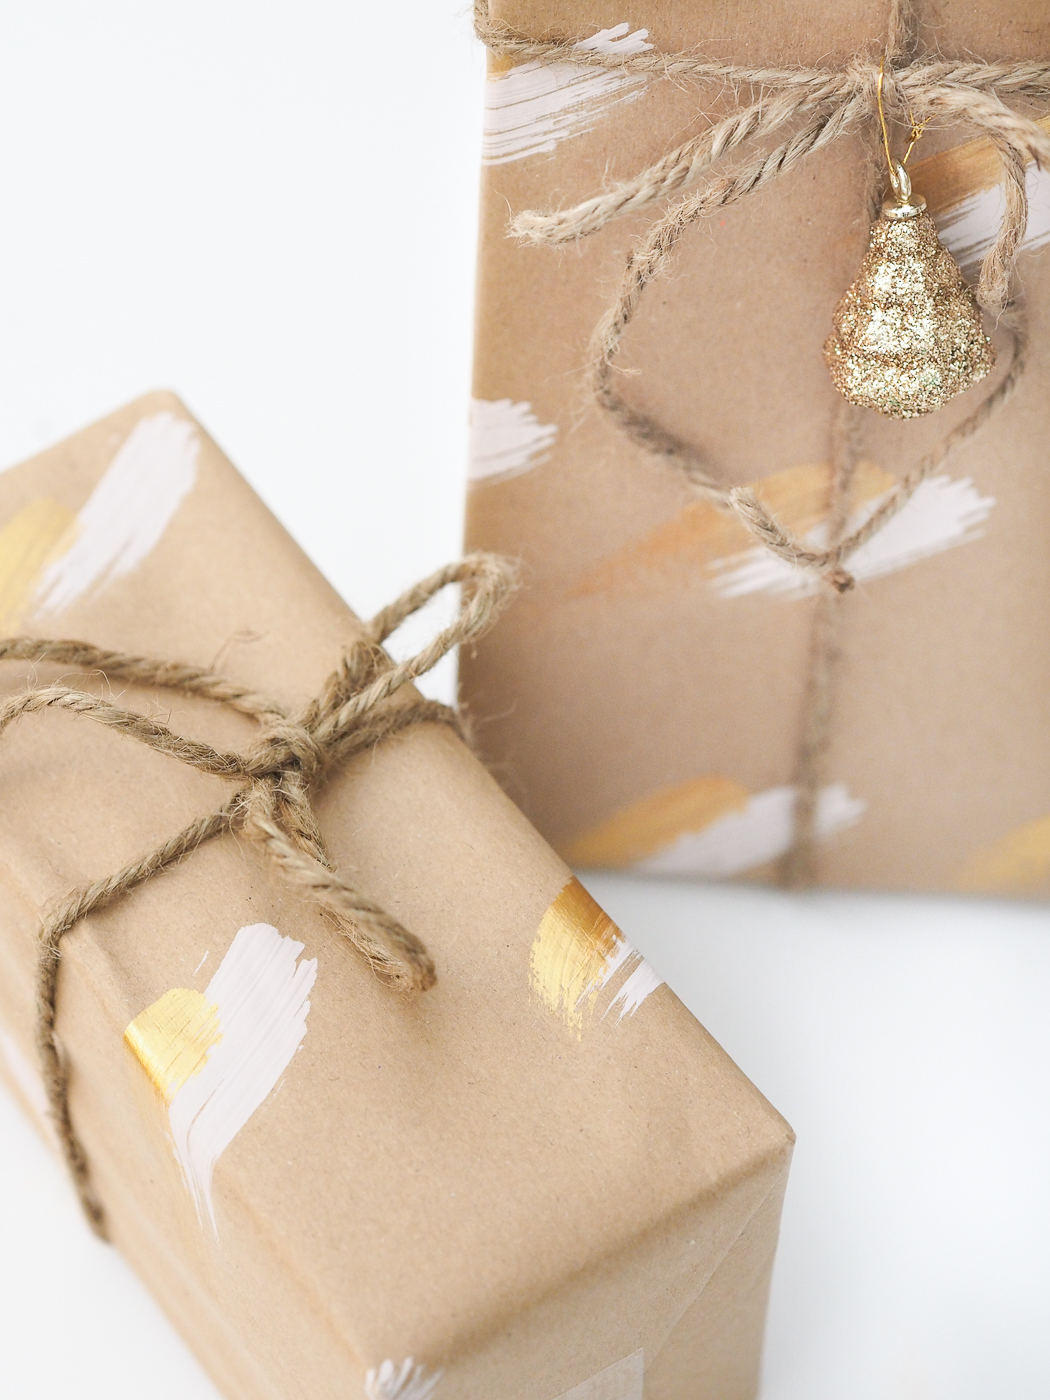 diy christmas wrapping paper ideas pink and gold